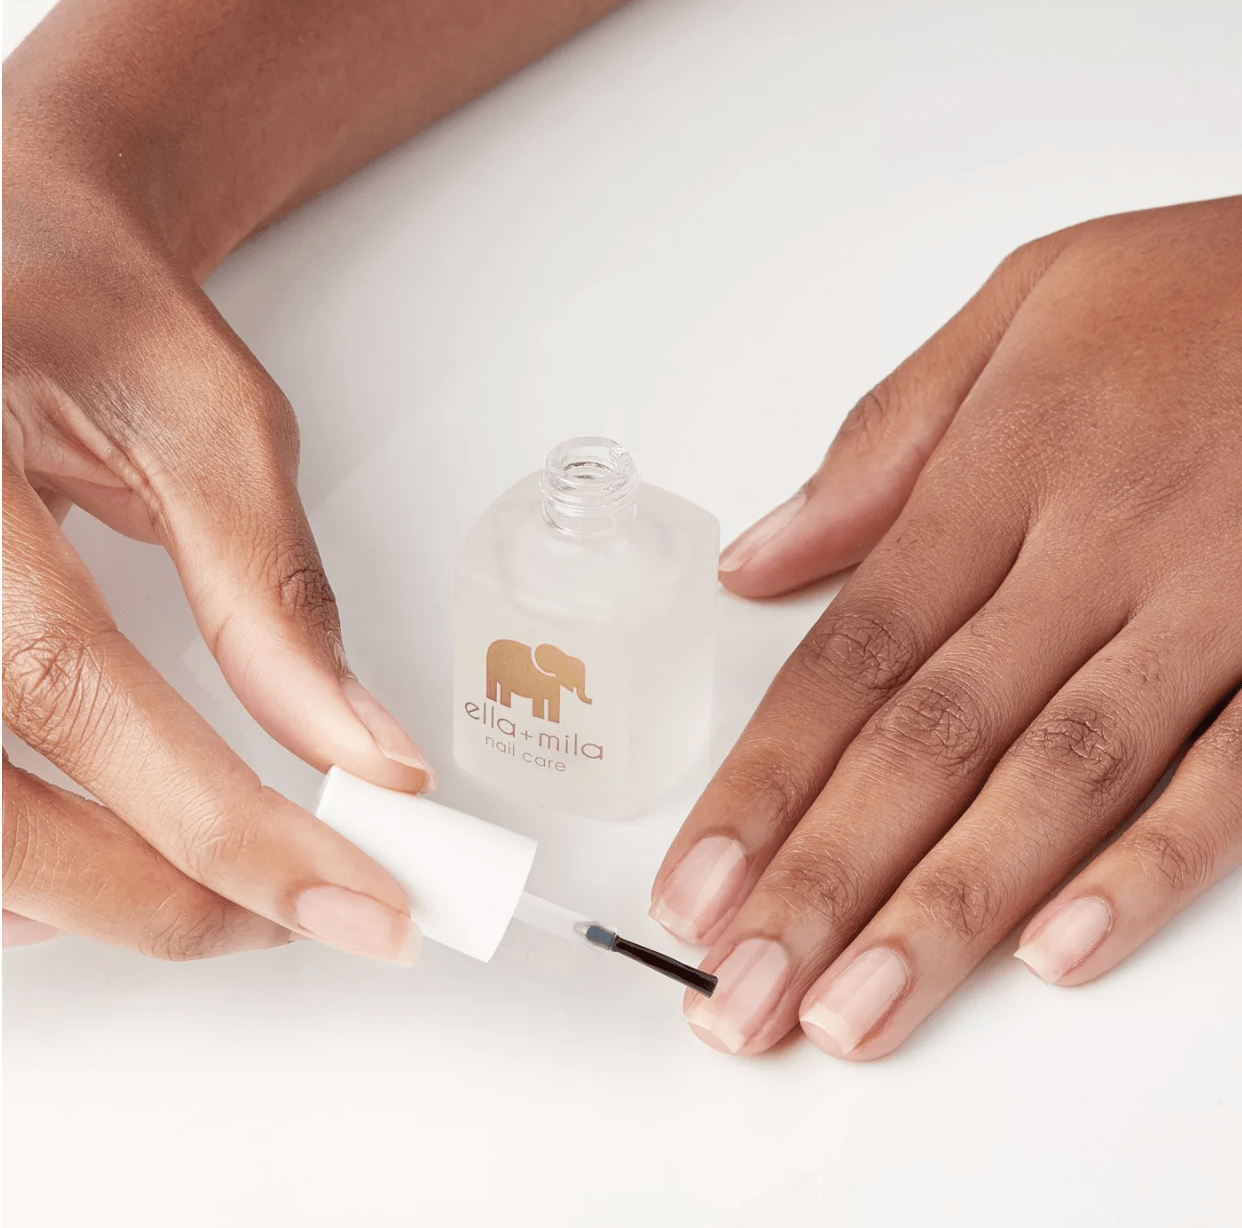 The best no-bite polish that helped me stop biting my nails